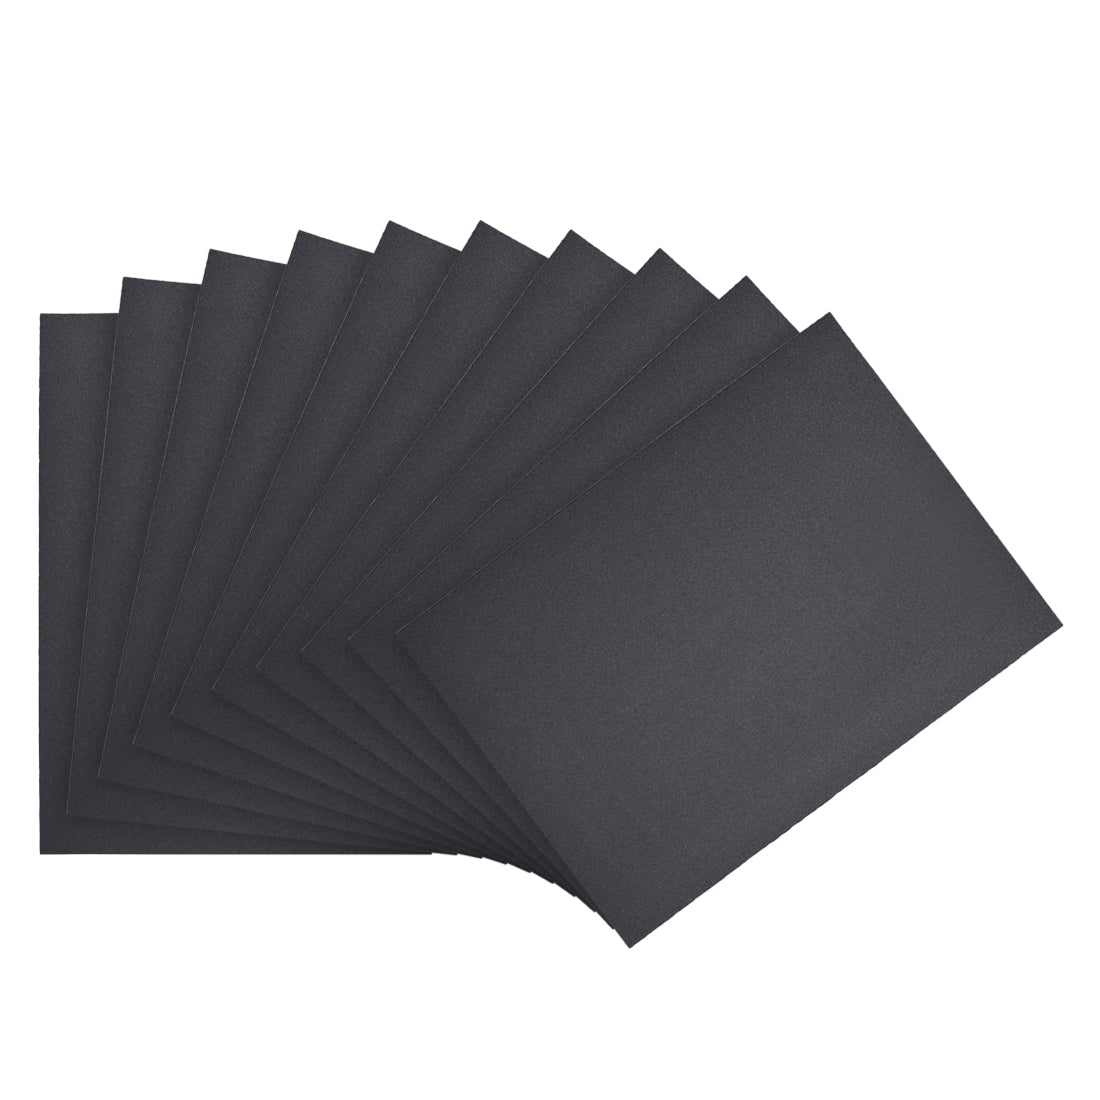 uxcell Uxcell Waterproof Sandpaper, Wet Dry Sand Paper Grit of 320, 11 x 9inch 10pcs